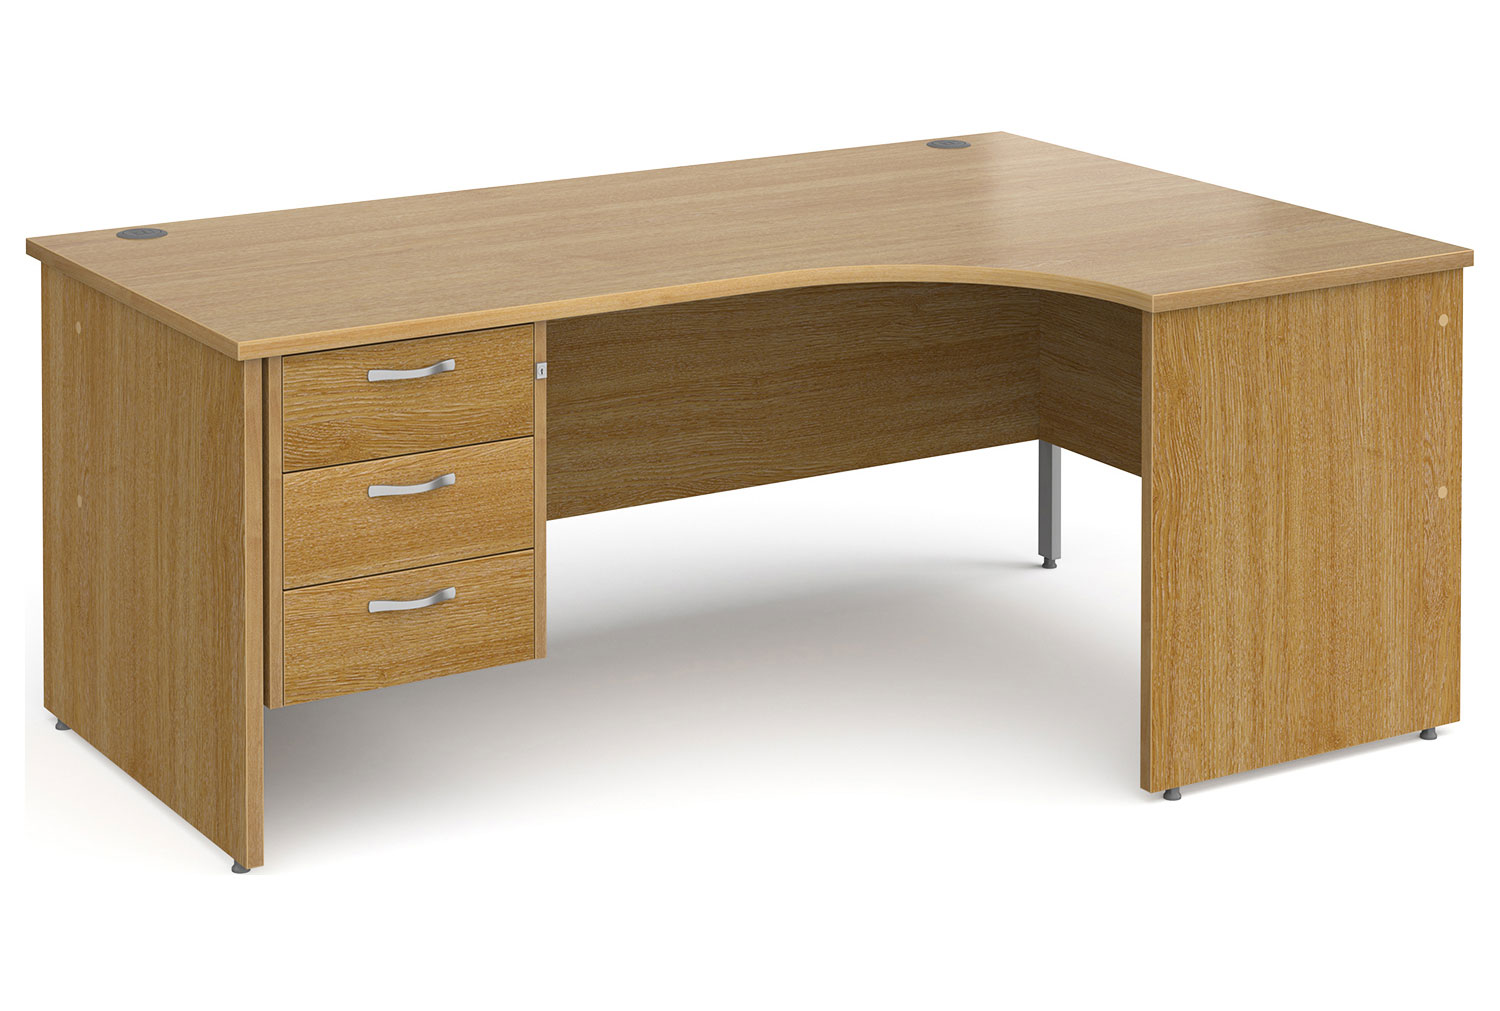 All Oak Panel End Right Hand Ergo Office Desk 3 Drawers, 180wx120/80dx73h (cm), Fully Installed